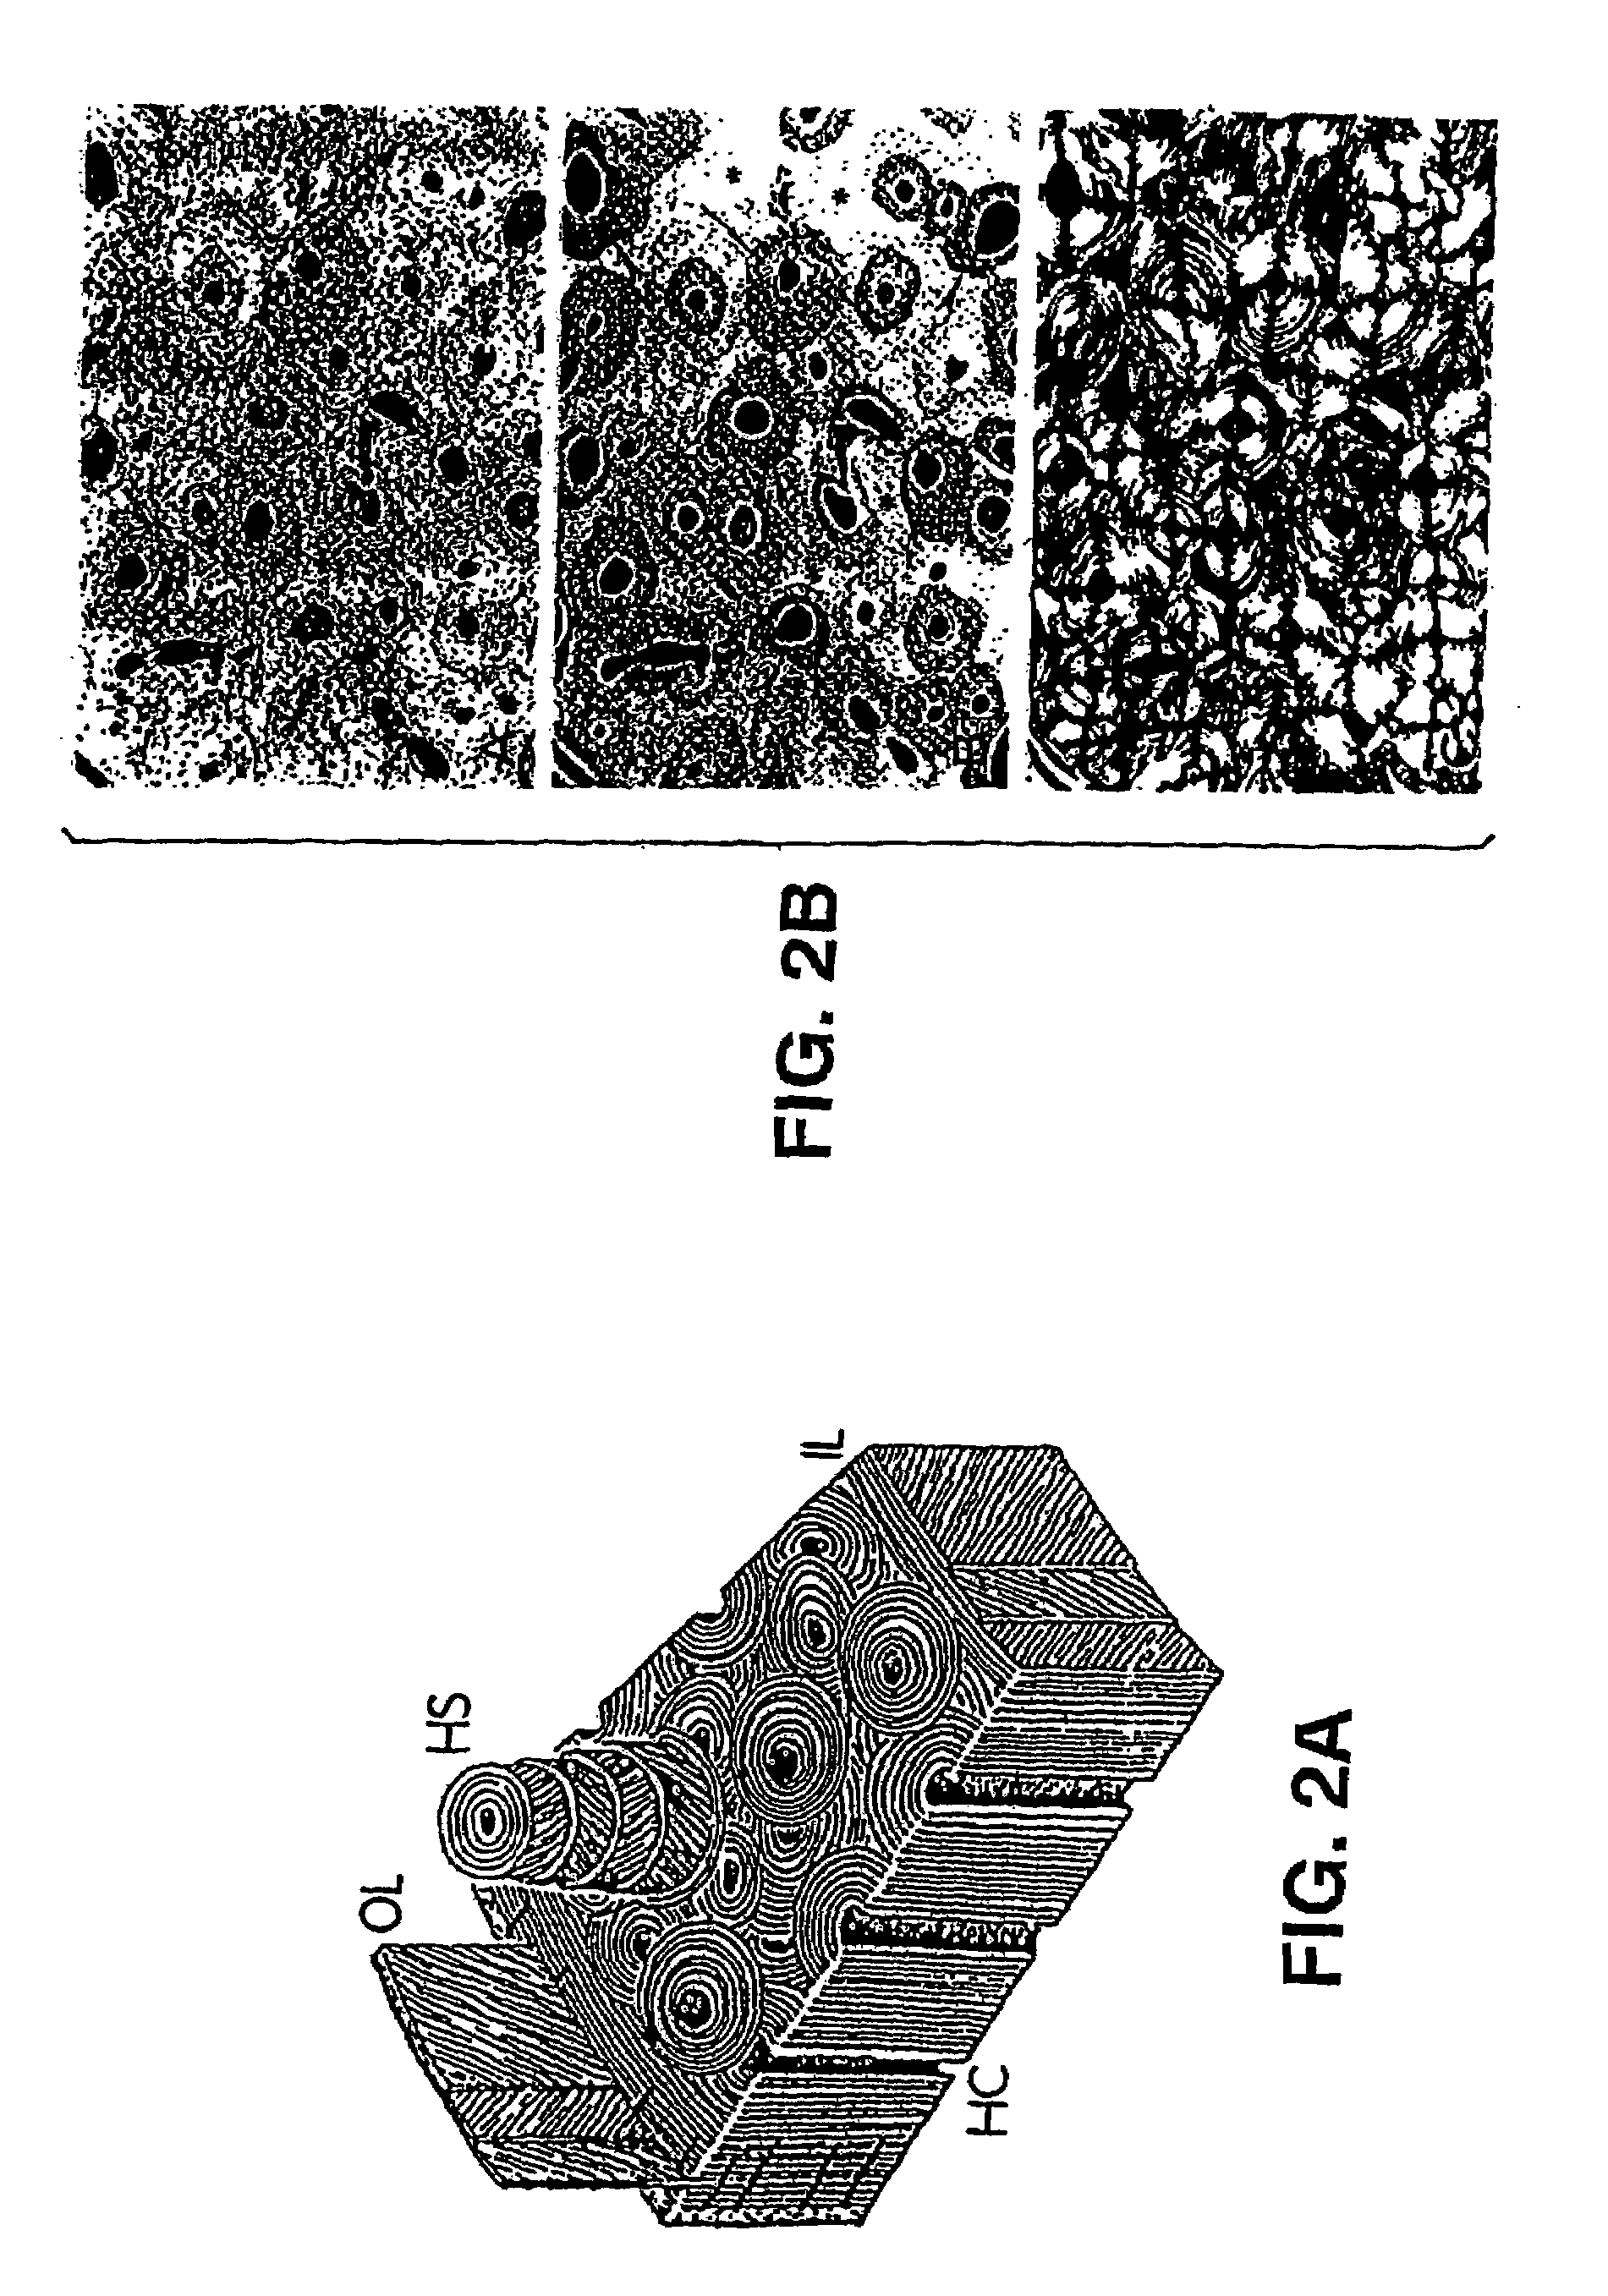 Method and system for modeling bone structure